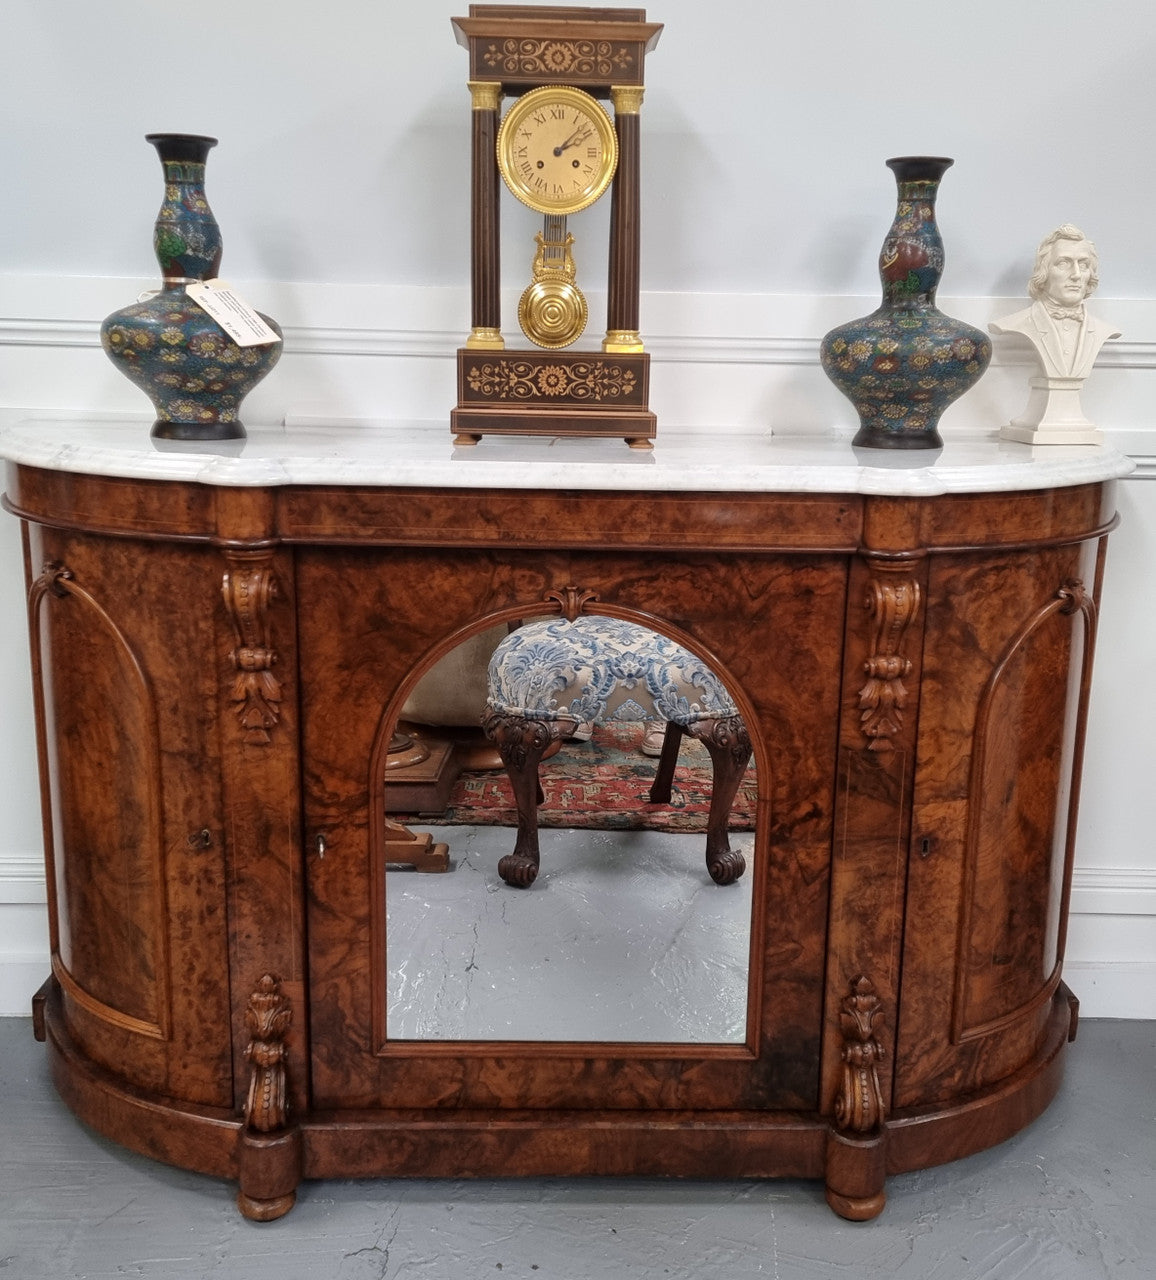 An elegant Antique Victorian Burr wood Walnut marble-top sideboard credenza with a mirrored center door. It has a white shaped marble top, mirror front, nicely carved details and three swing doors along with two keys. It is in good original detailed condition.